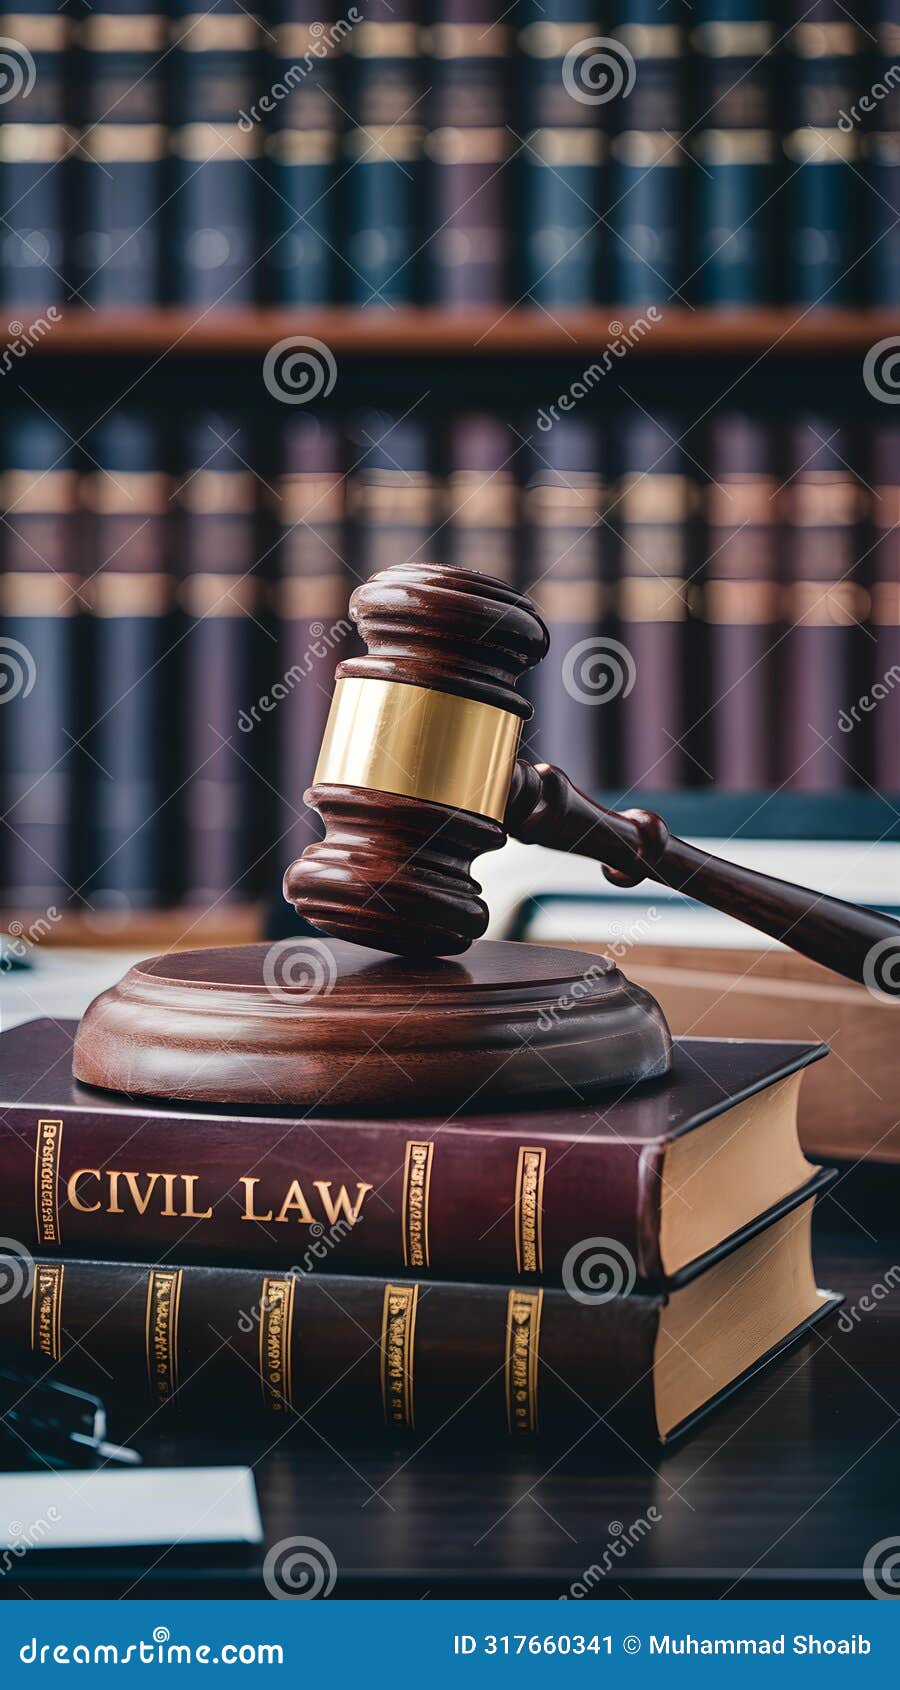 ic legal concept depicted with gavel, book on desk, scholarly environment.